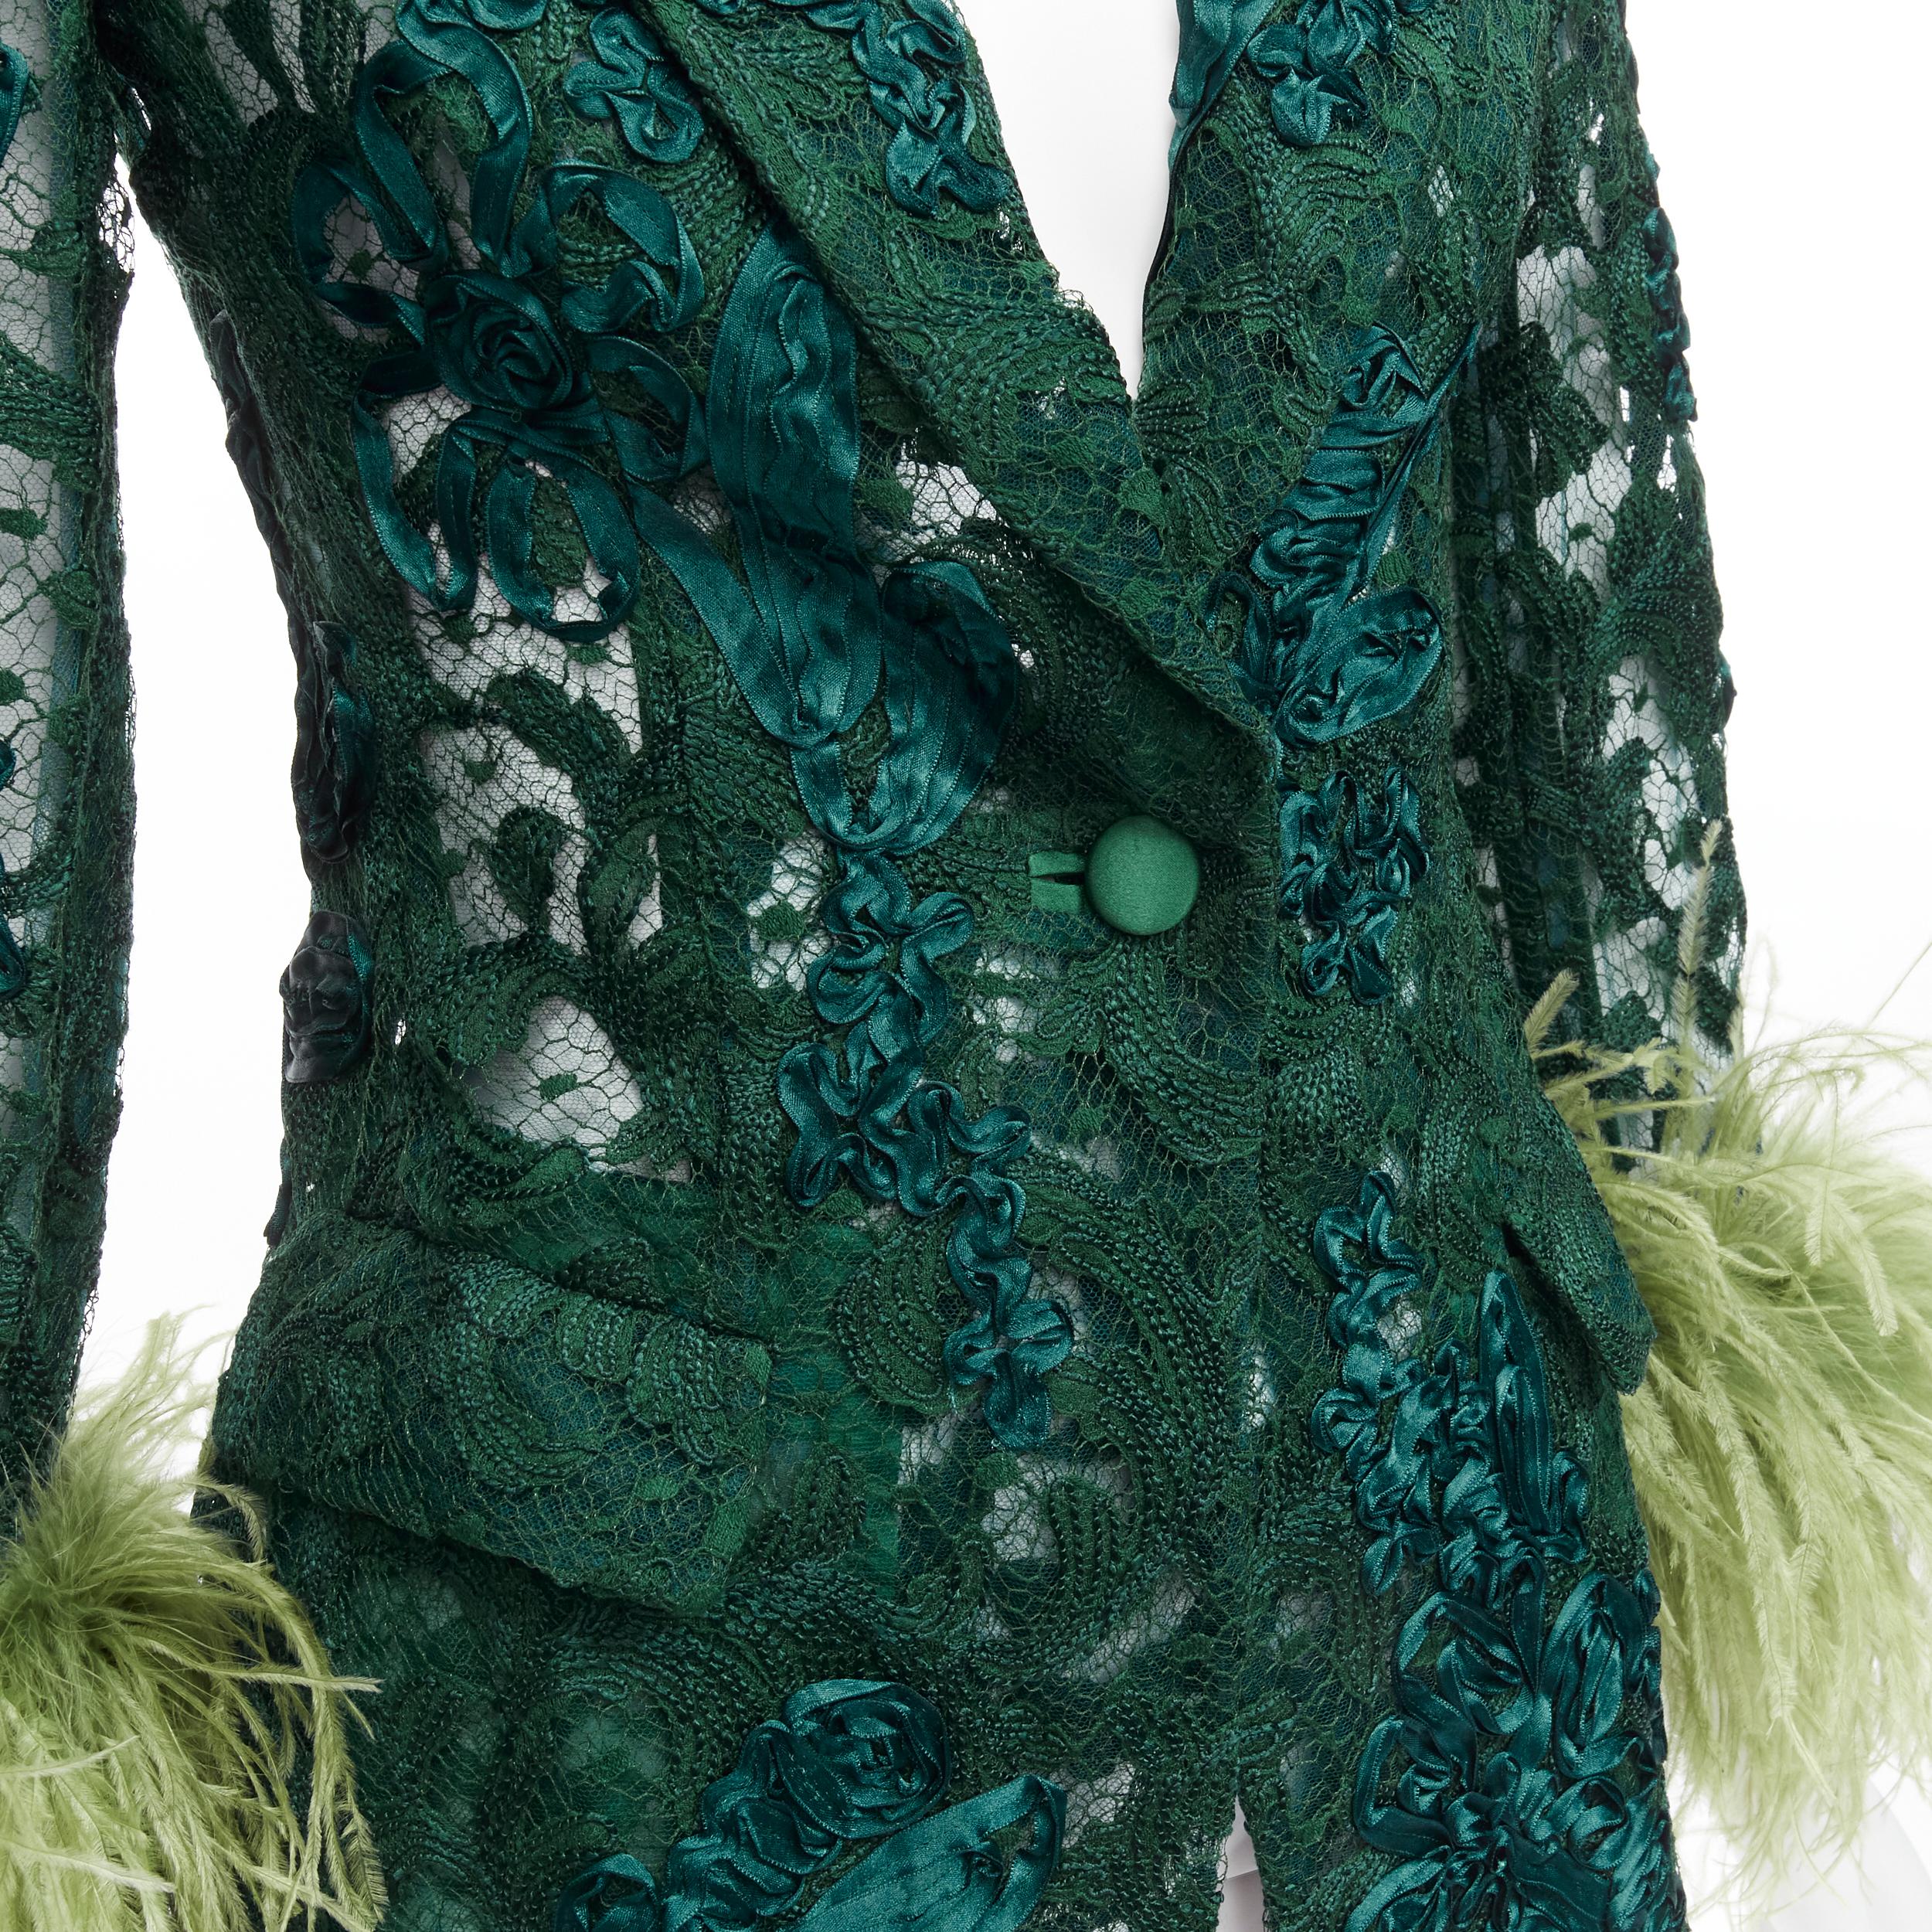 GUCCI Aria green ostrich feather cuff embellished lace sheer blazer jacket IT36 XXS
Reference: AAWC/A00485
Brand: Gucci
Designer: Alessandro Michele
Collection: Aria - Runway
Material: Viscose, Cotton, Blend
Color: Green
Pattern: Lace
Closure: